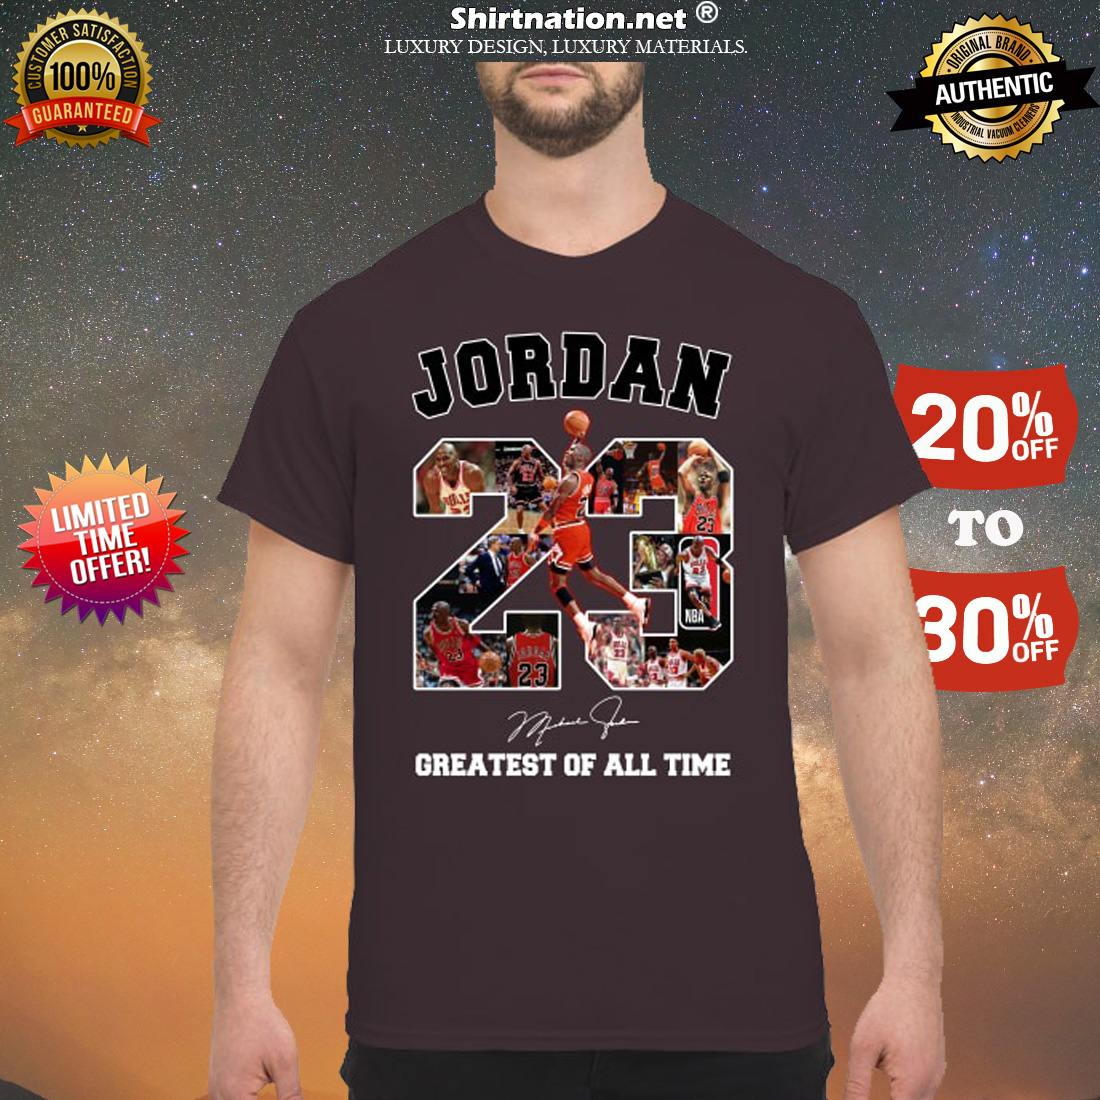 [NEWEST] Micheal Jordan 23 greatest of all time shirt